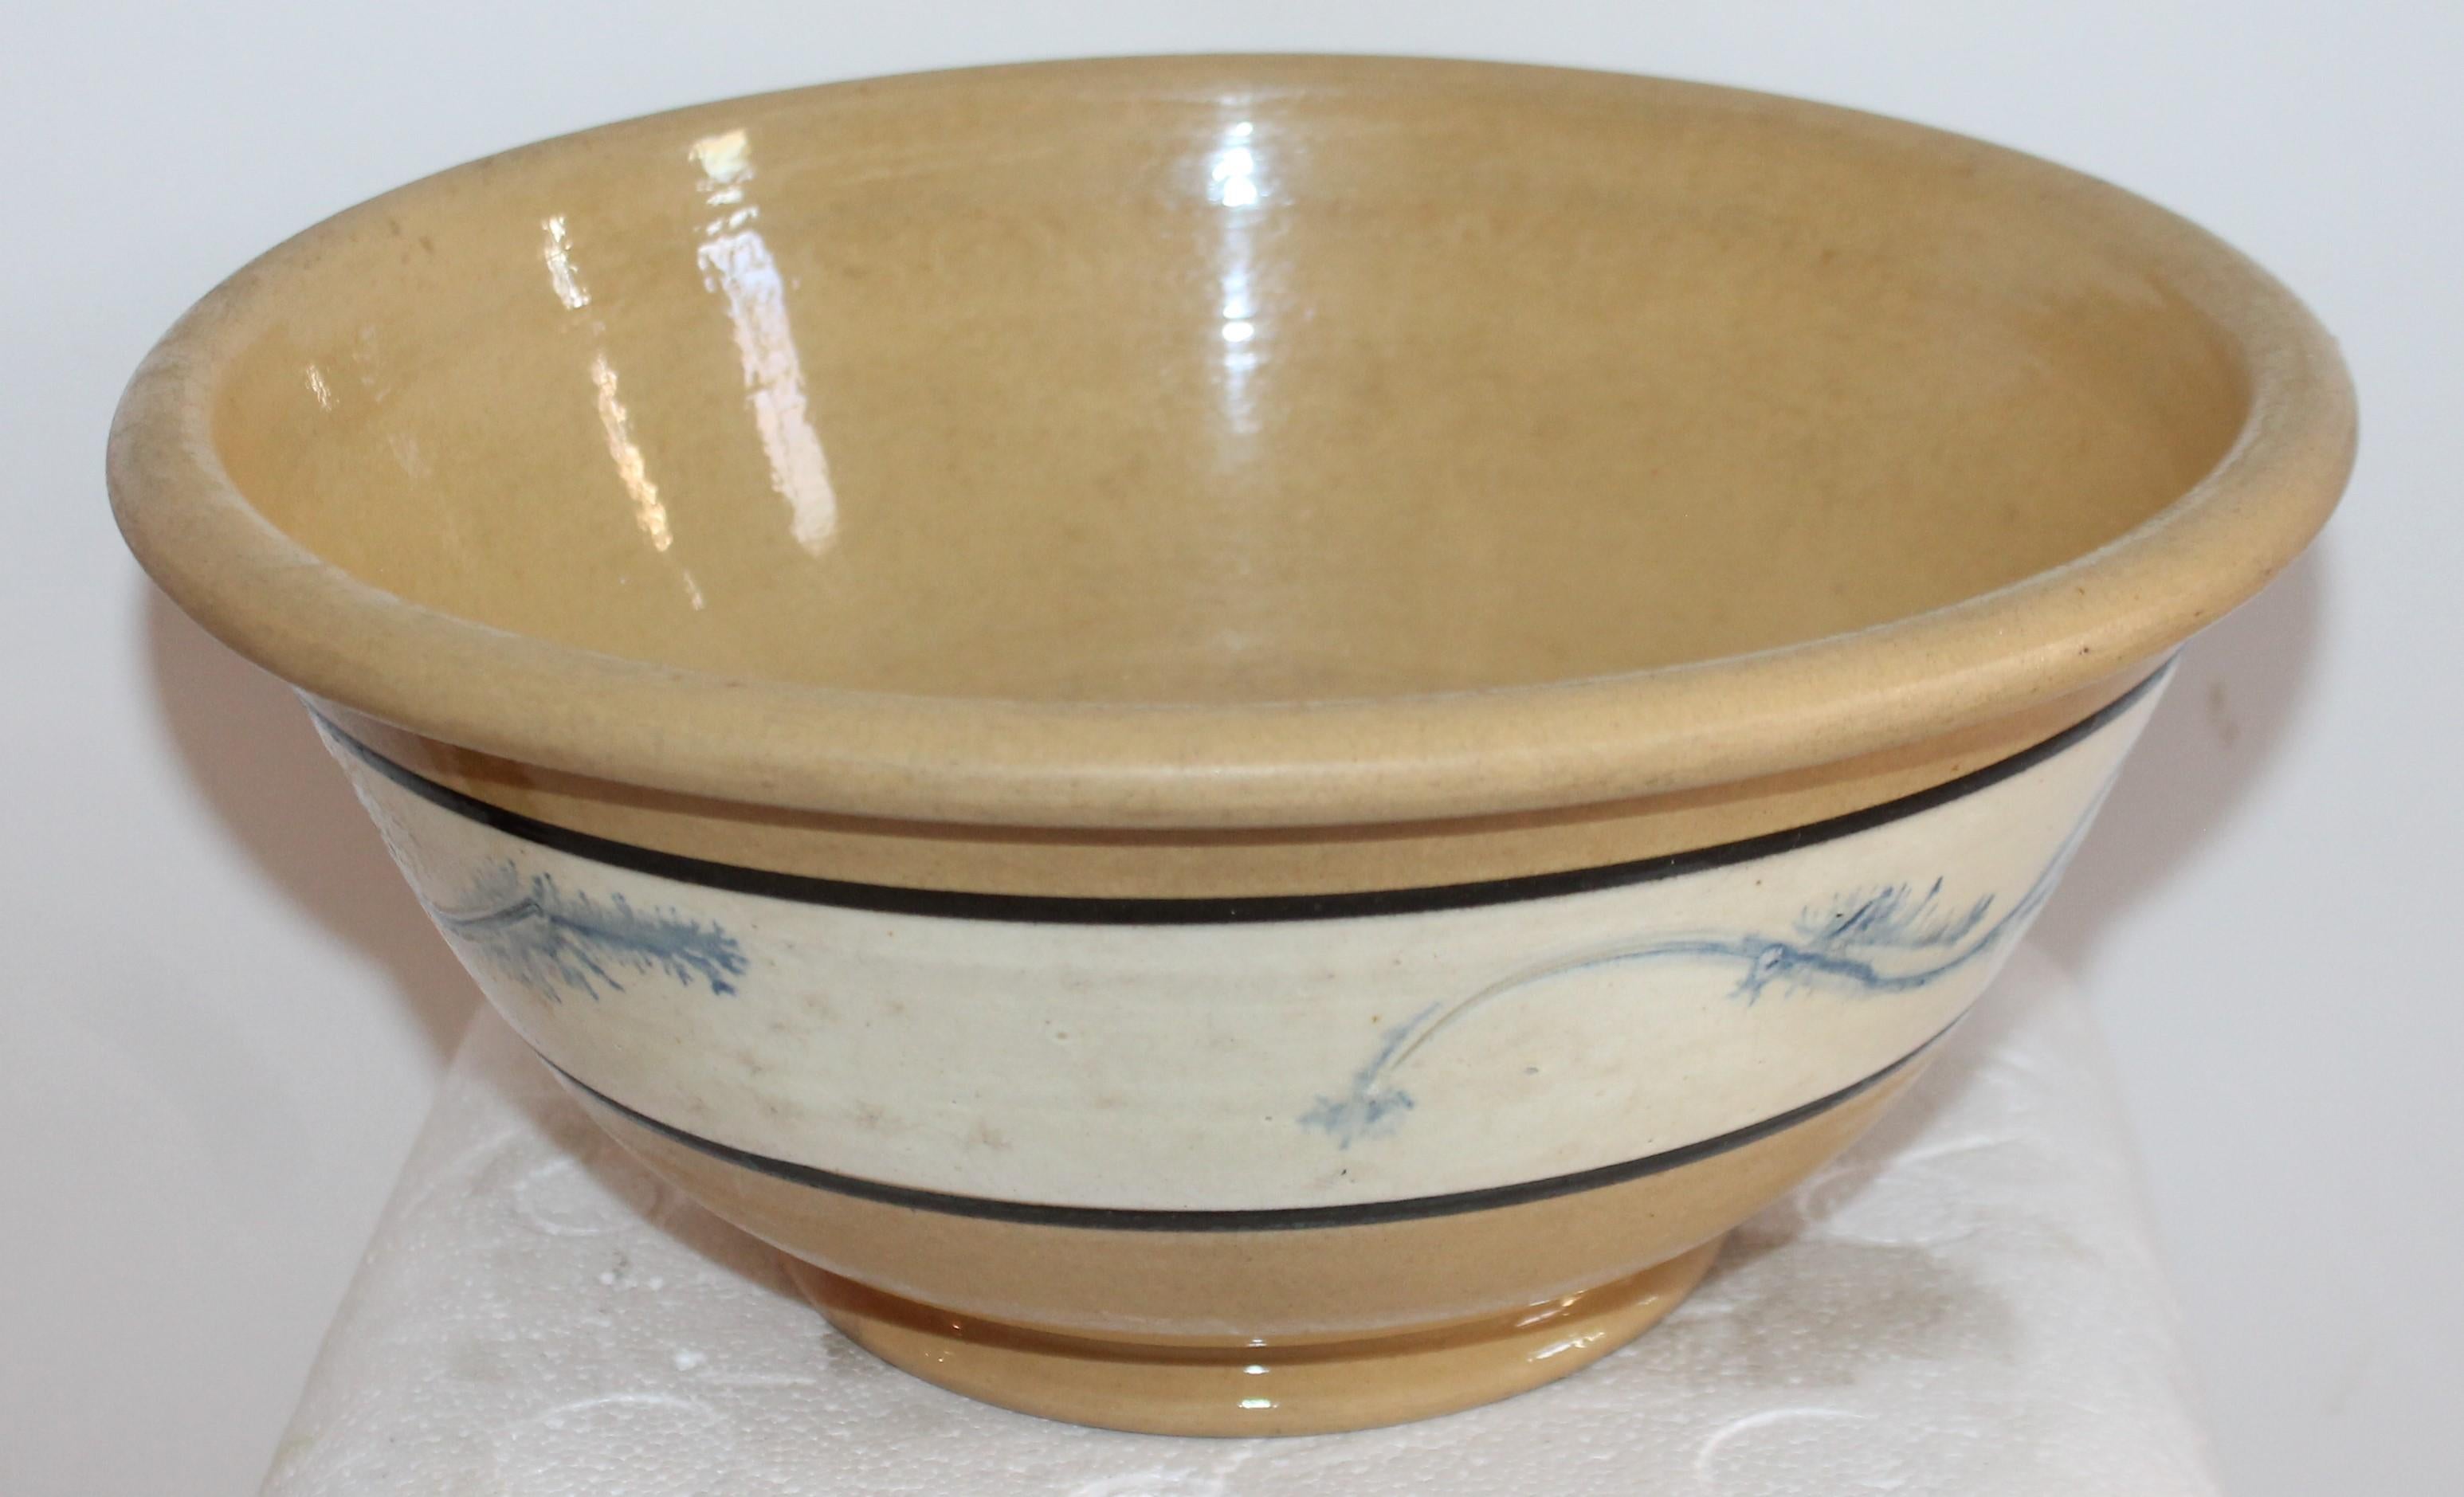 19th century mocha yellow ware mixing bowl with blue seaweed decoration. The condition is very good and shows nice patina on the base.